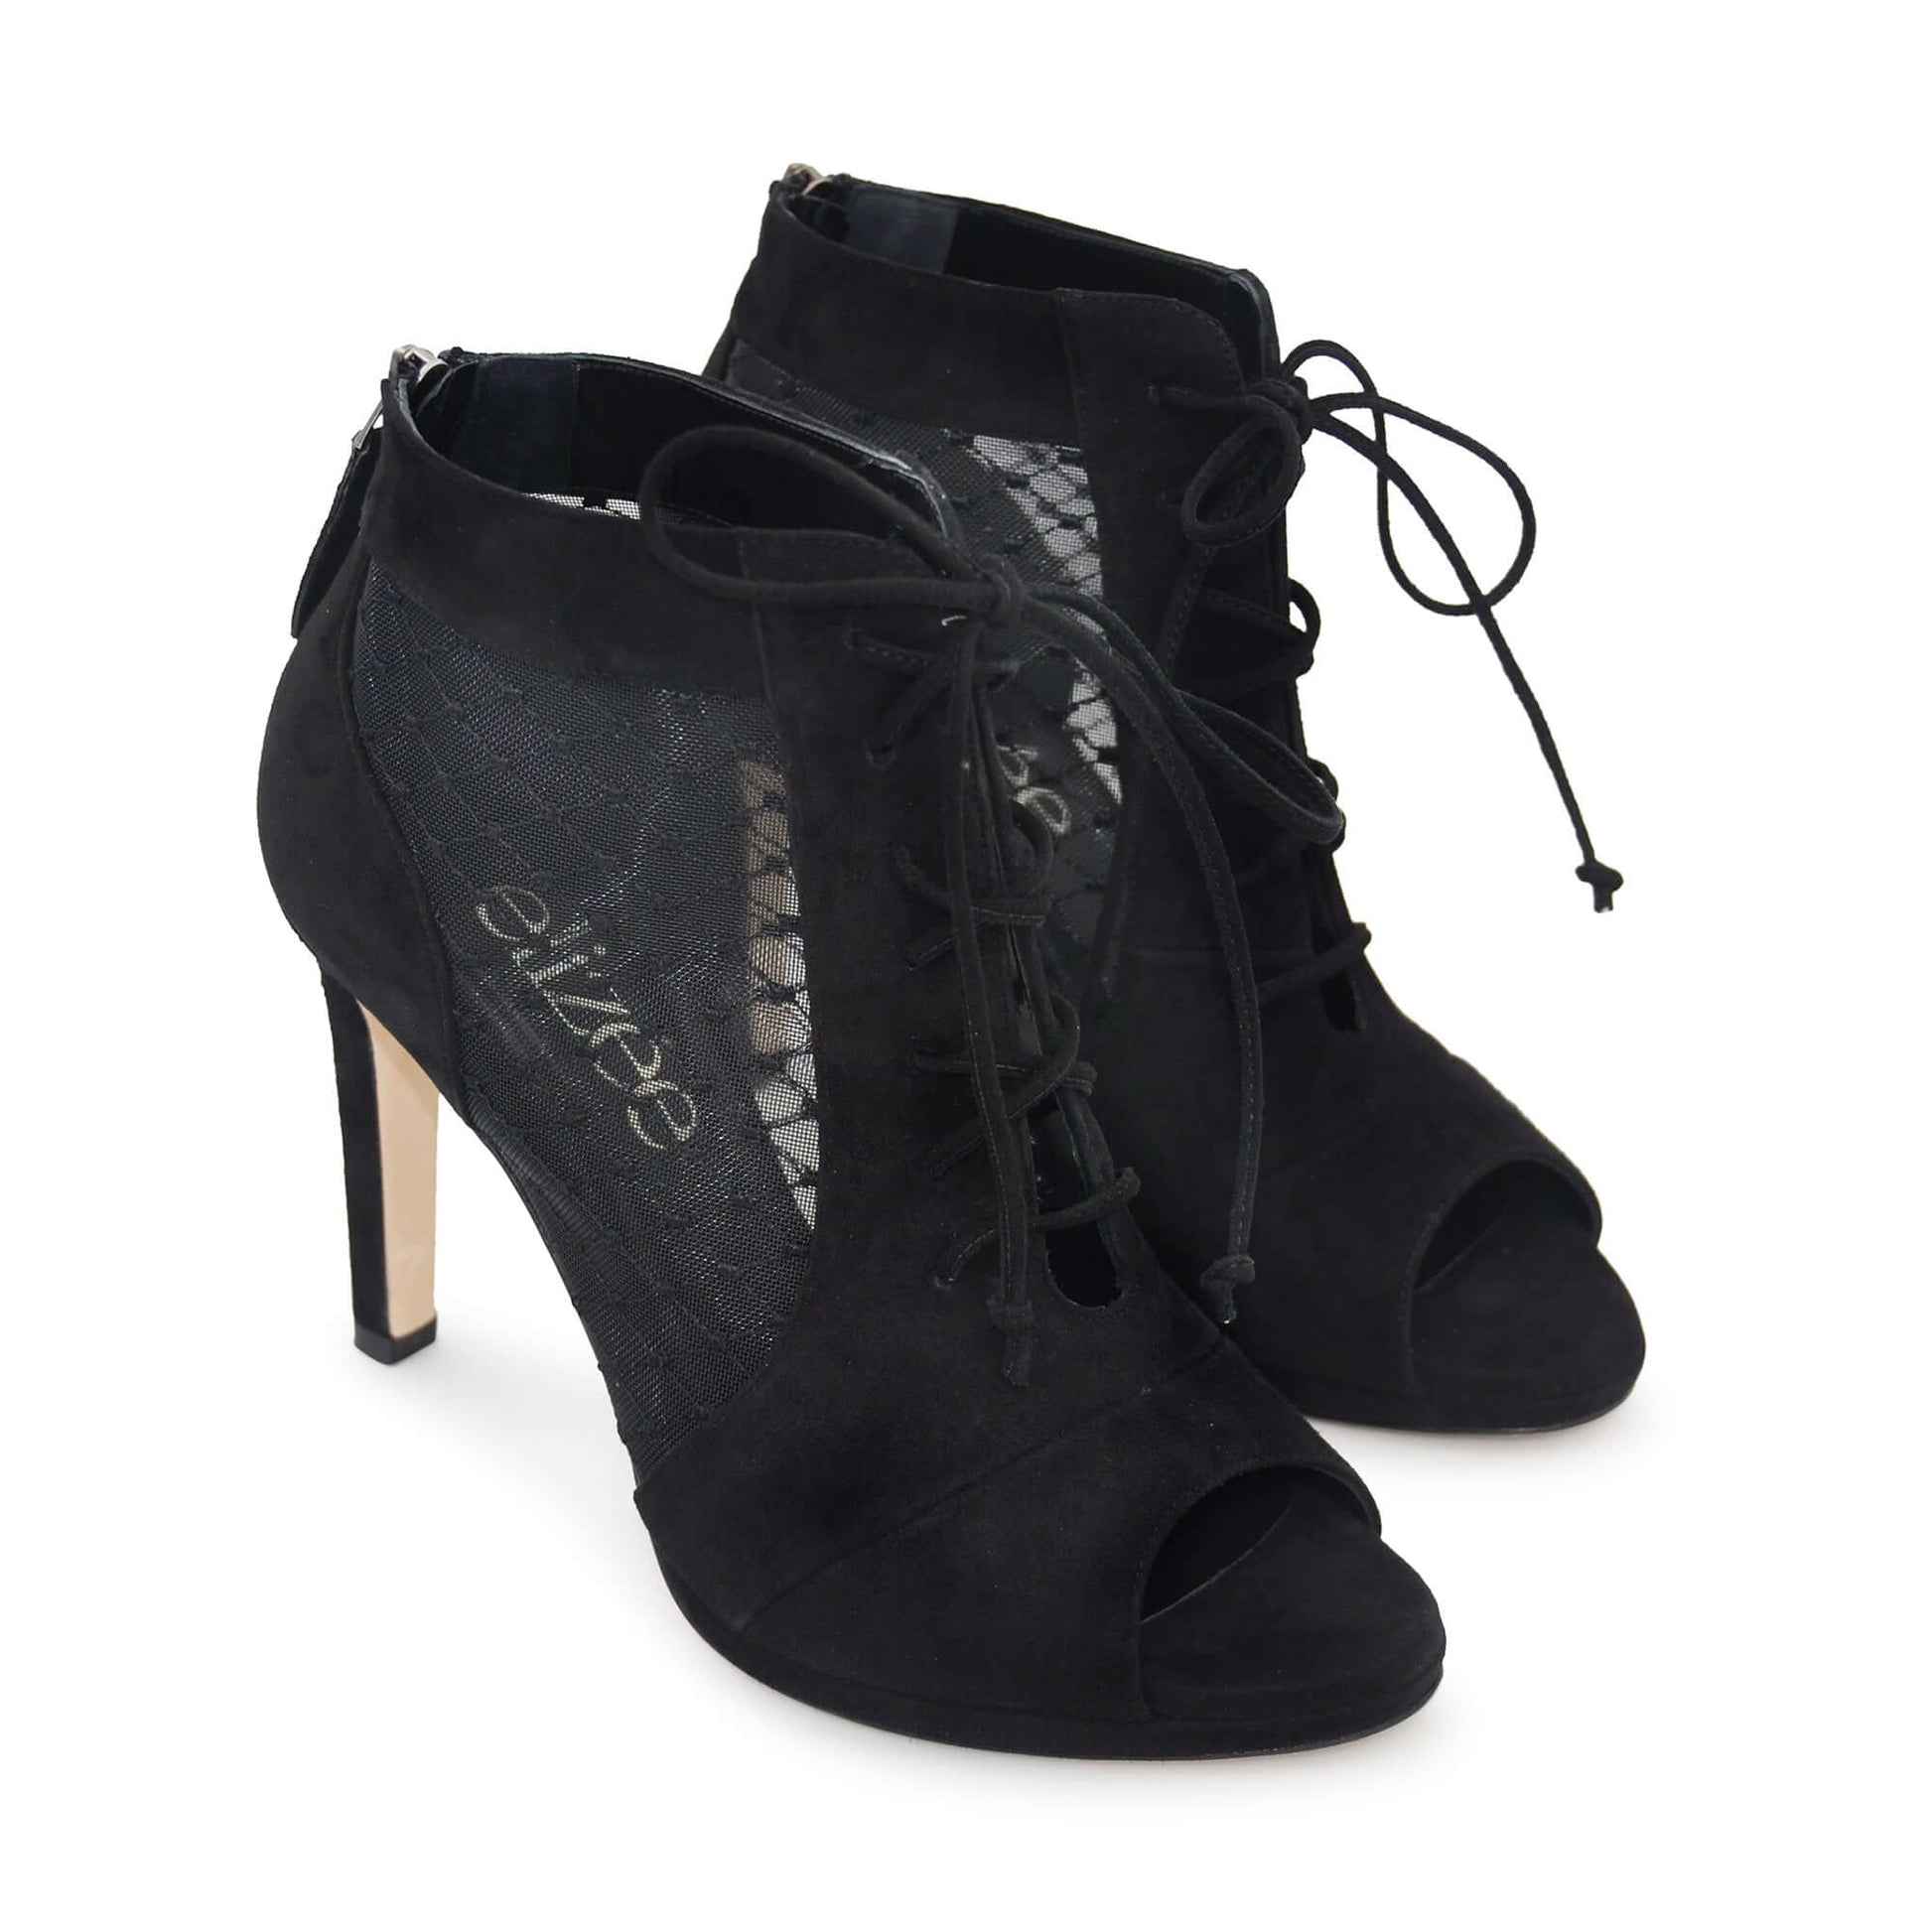 The Bella Bootie - Black Suede Leather High Heel Boots